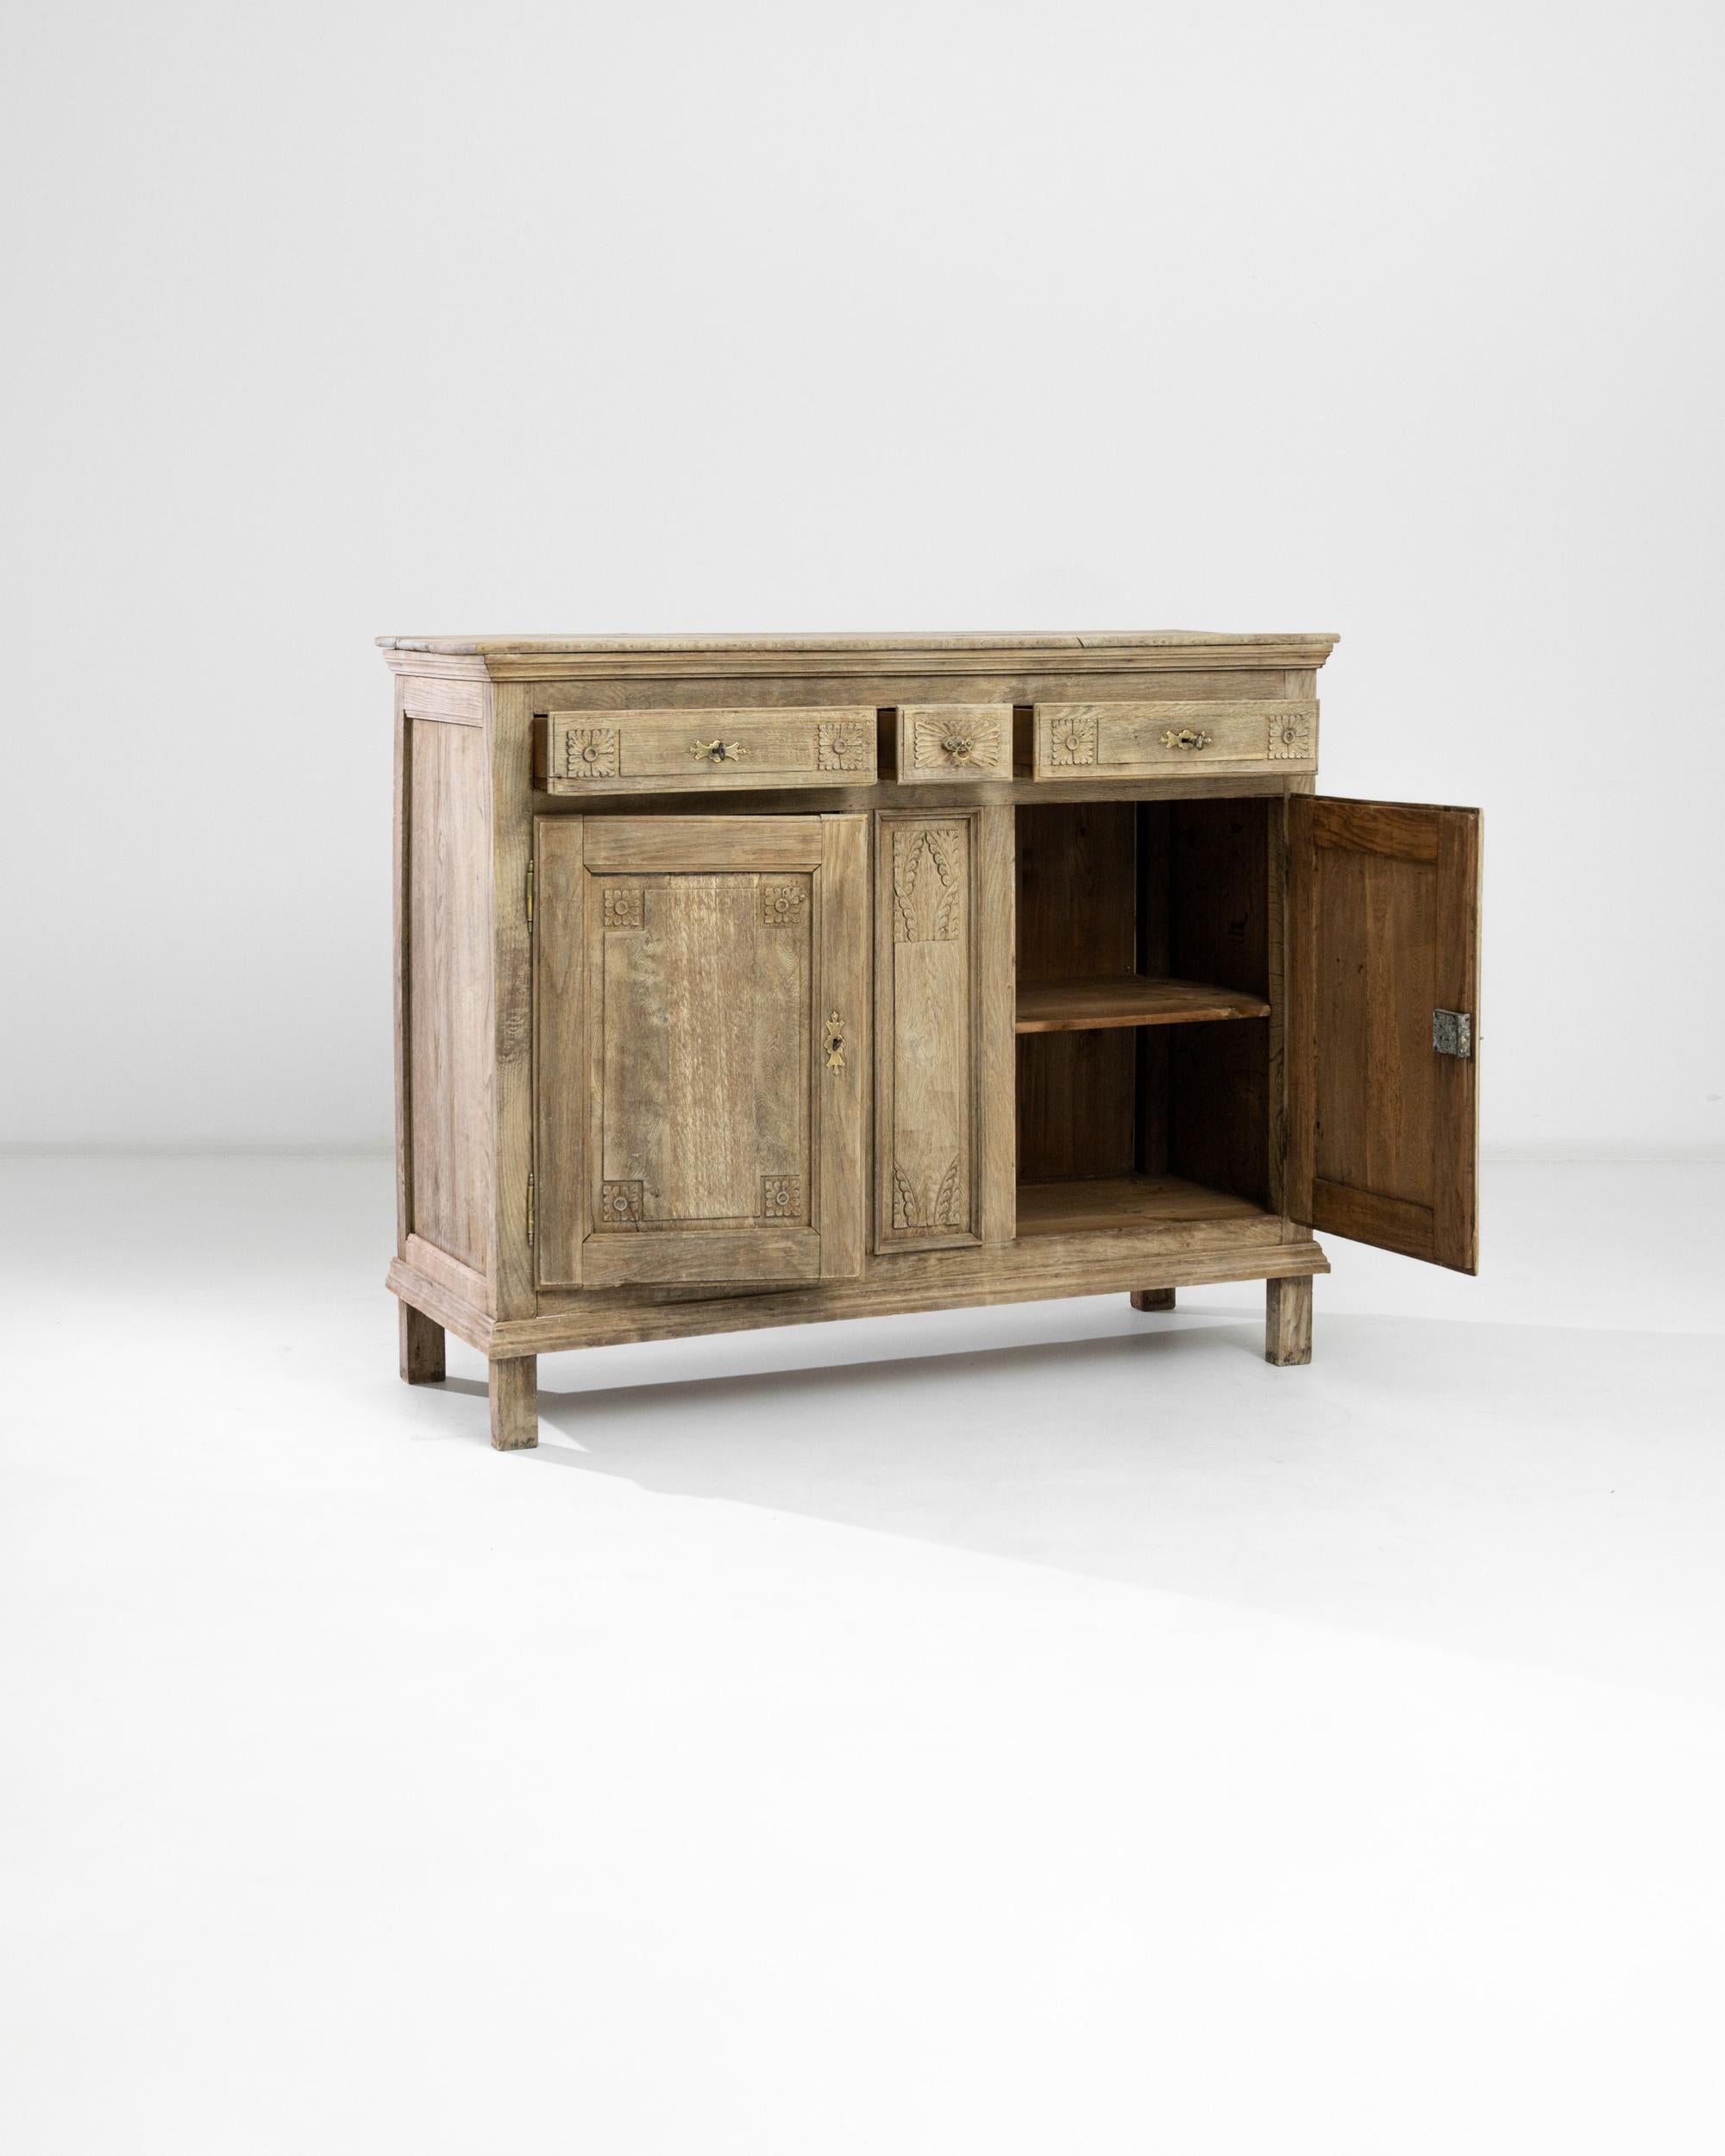 French Provincial 19th Century French Oak Buffet